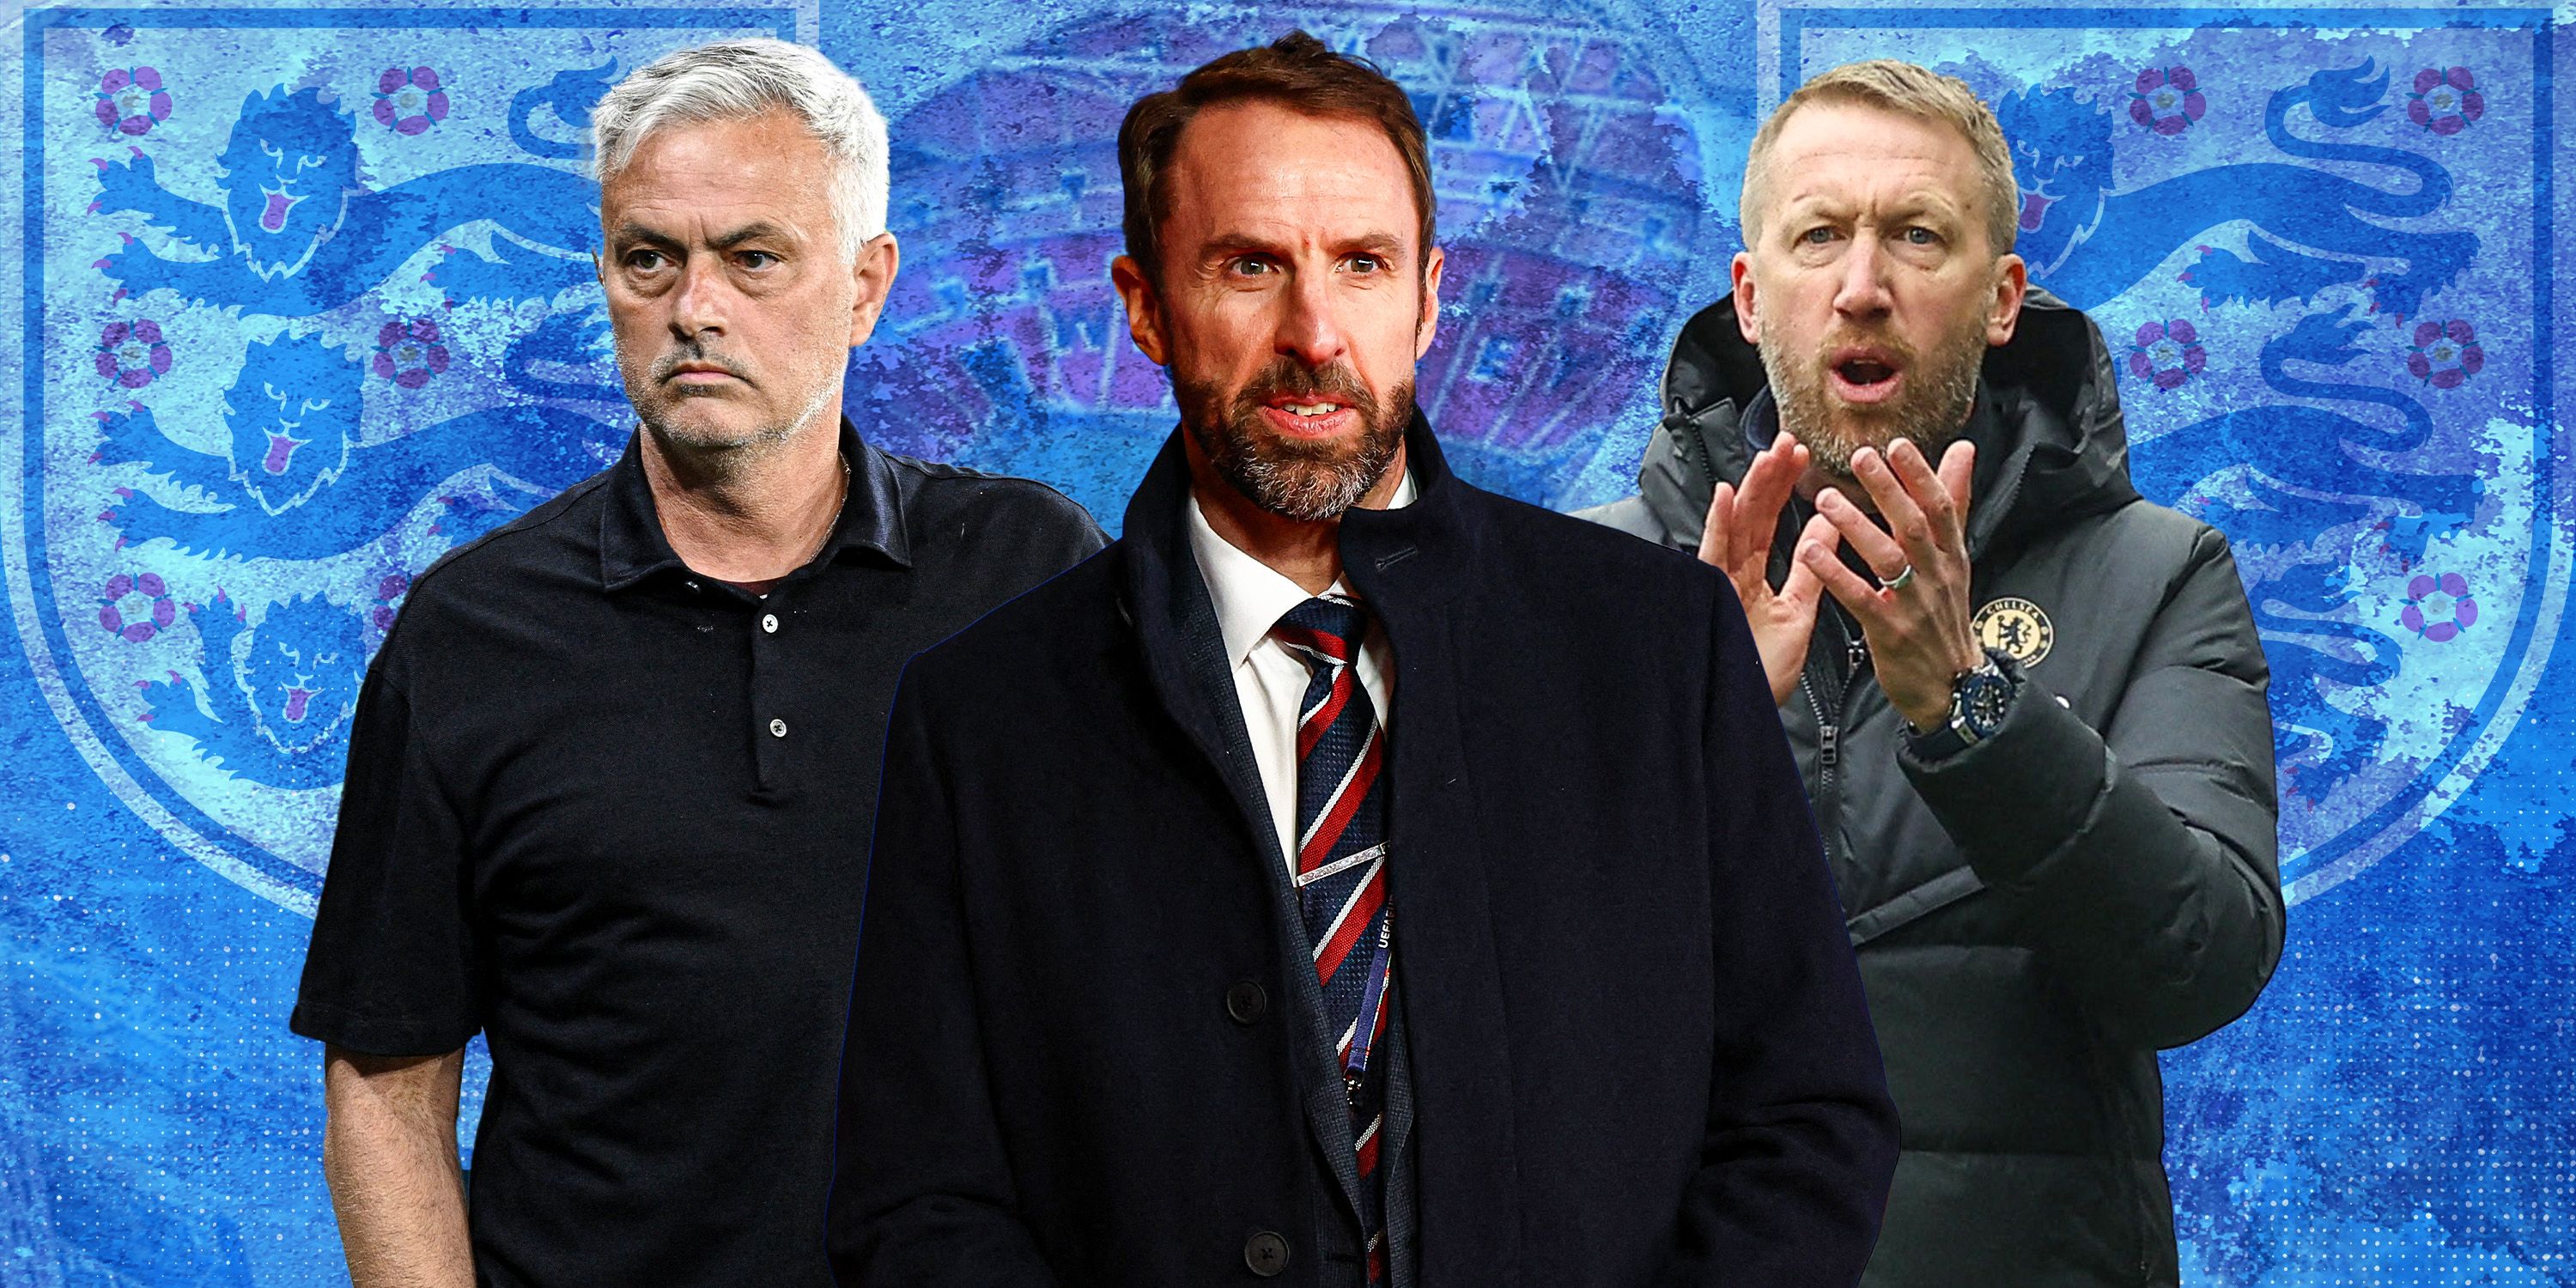 Gareth Southgate in the middle with Jose Mourinho and Graham Potter on either side - plus an England football badge